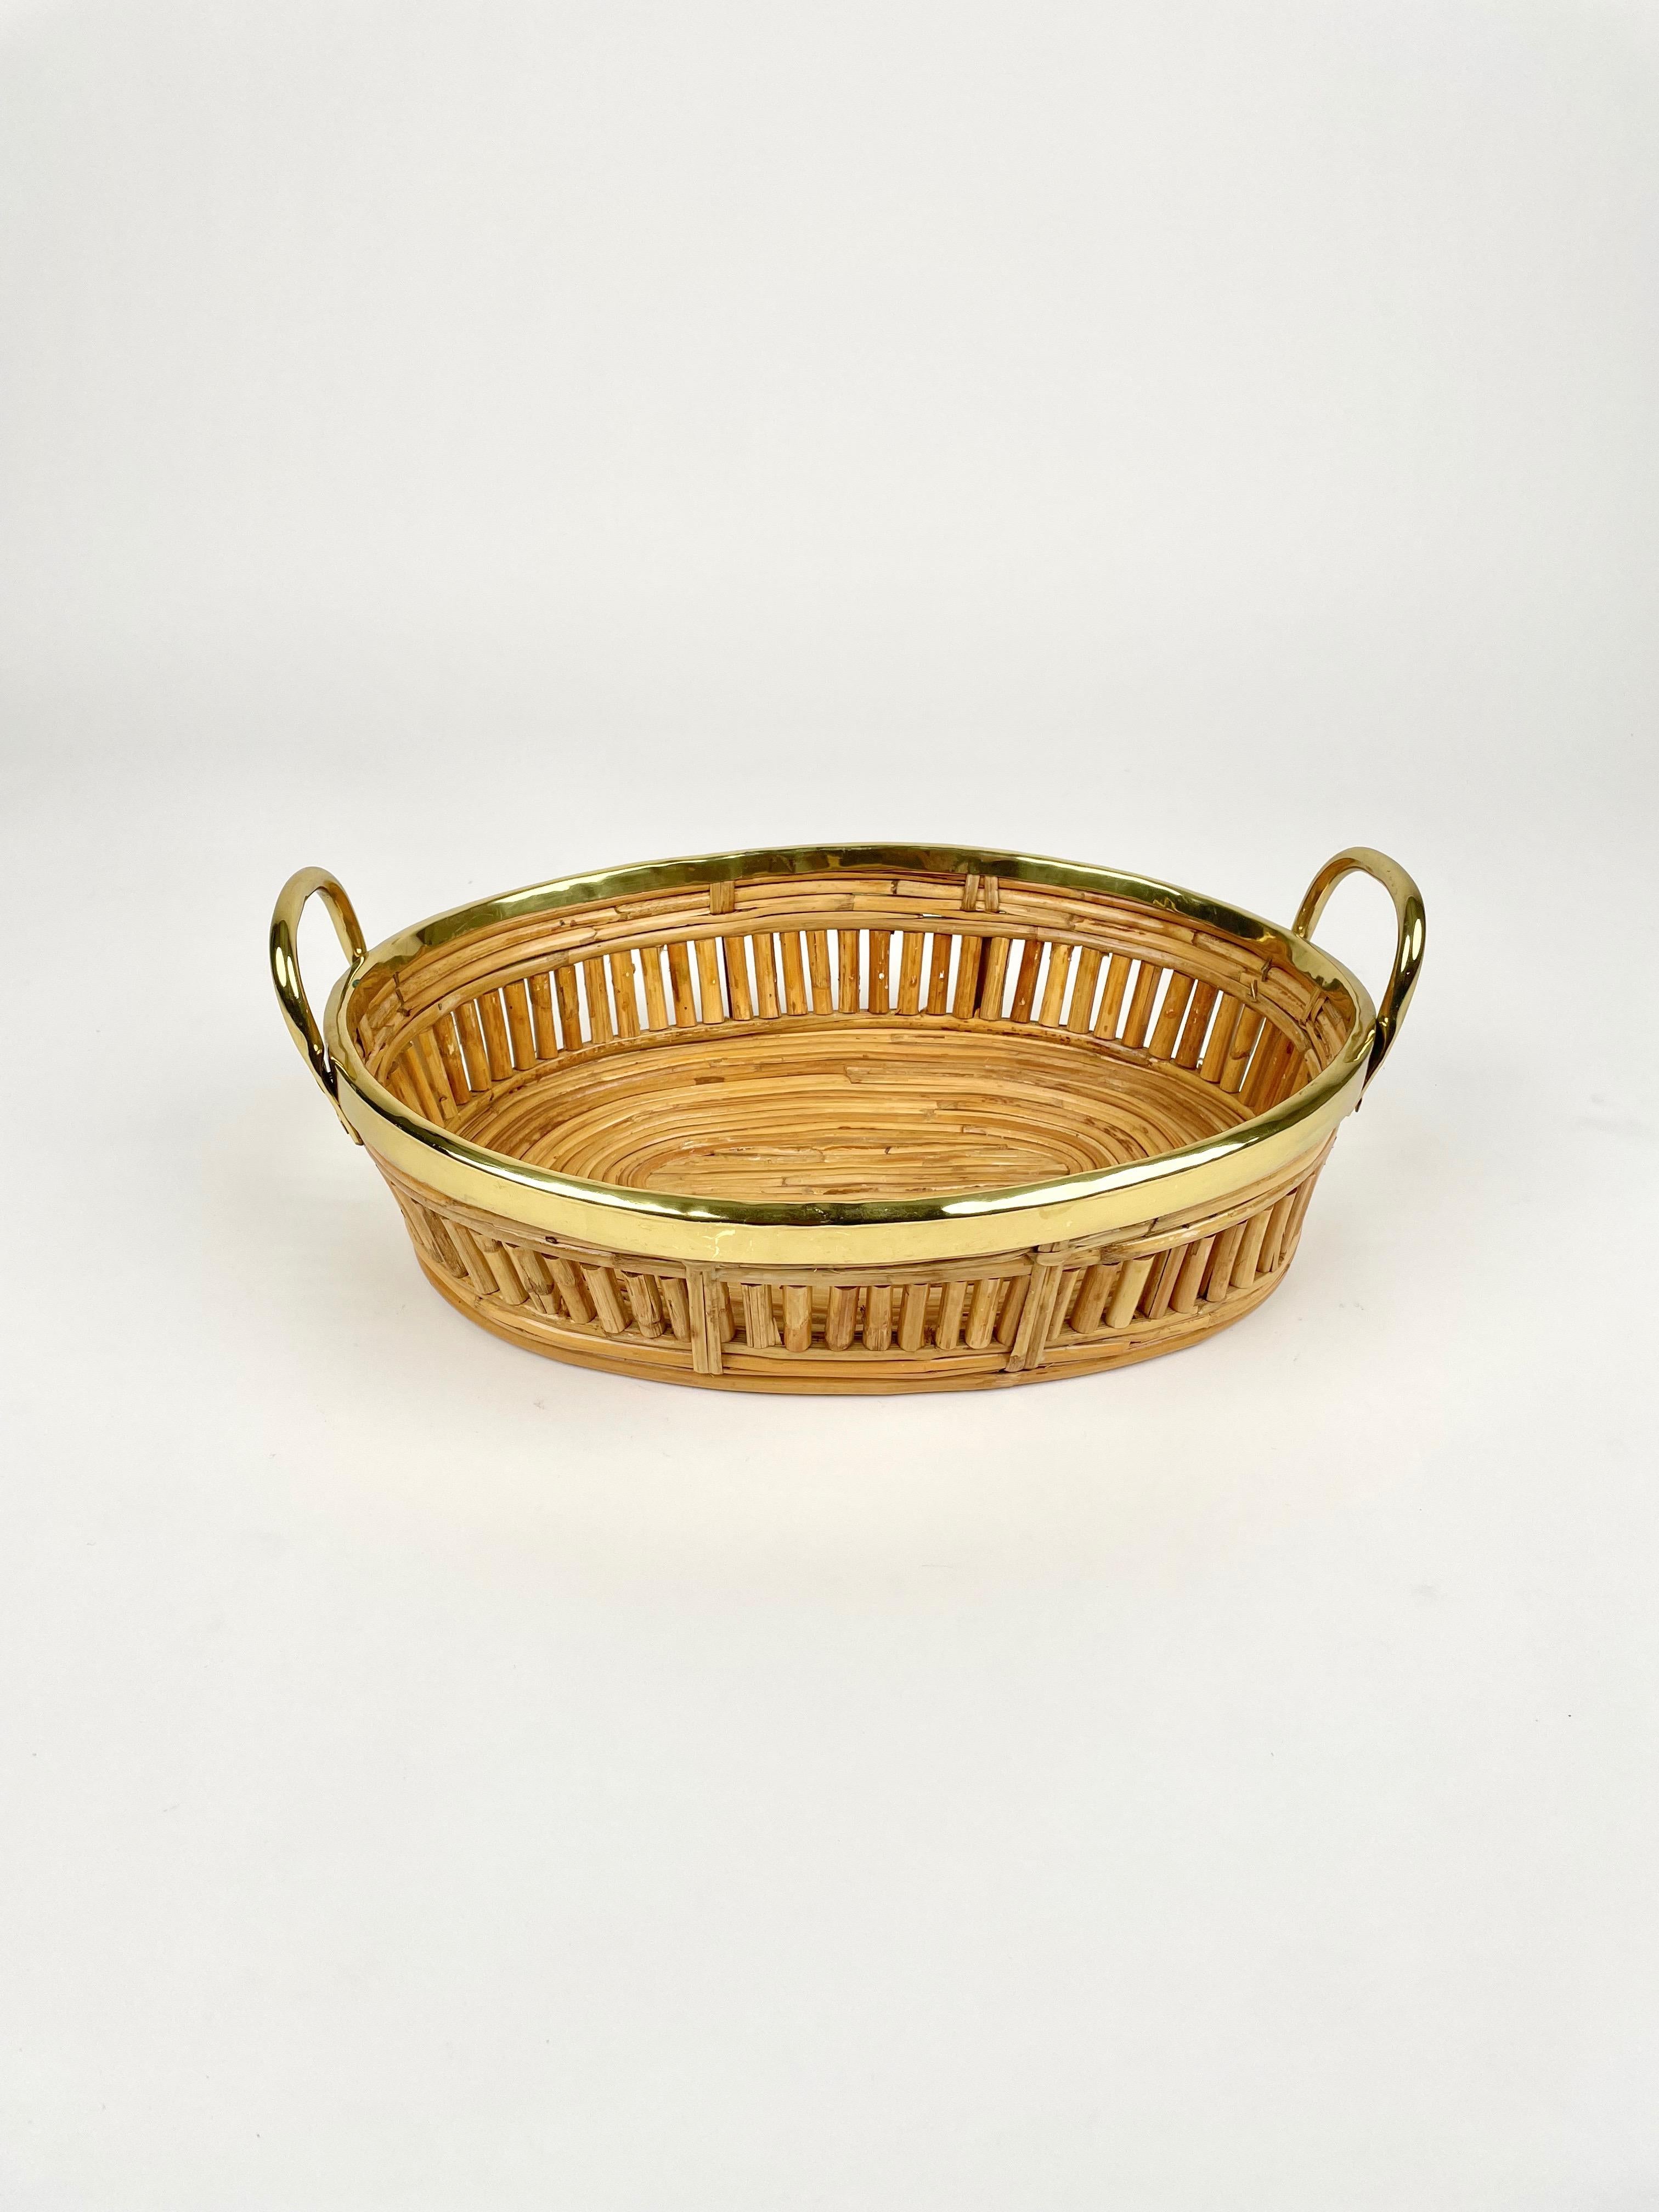 Midcentury Centerpiece Basket Rattan and Brass, Italy 1970s For Sale 1